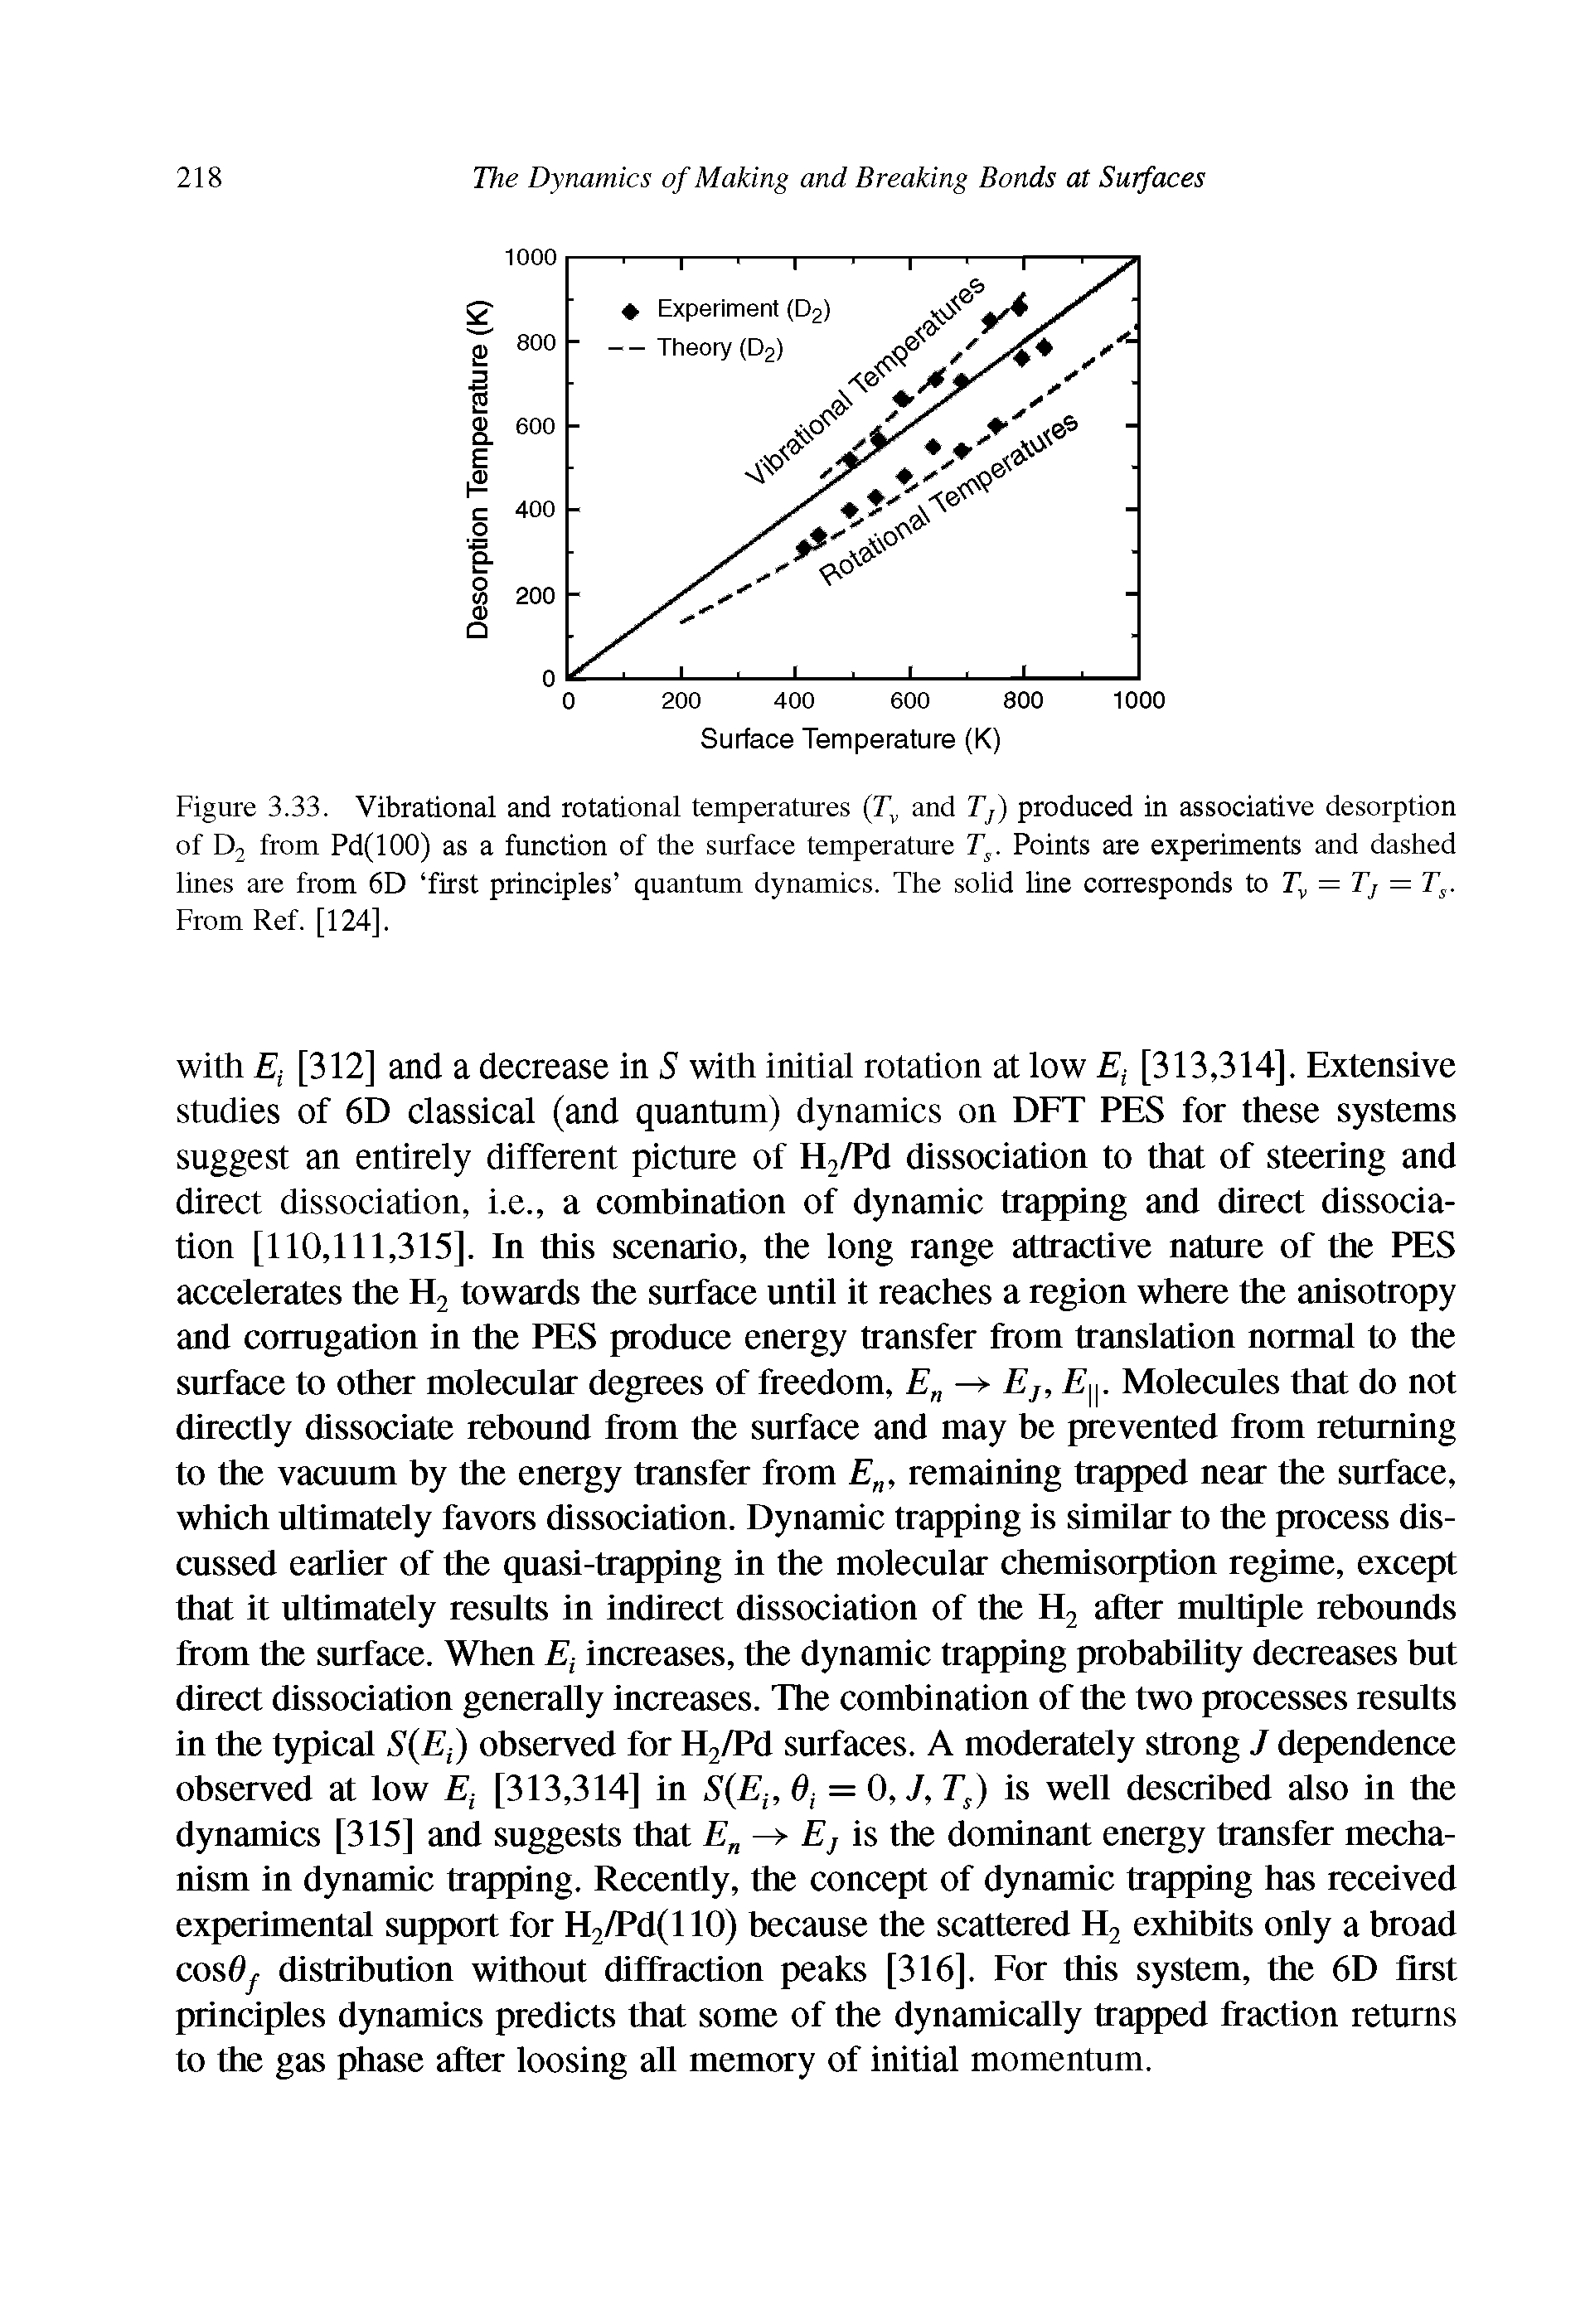 Figure 3.33. Vibrational and rotational temperatures (Tv and Tf) produced in associative desorption of D2 from Pd(100) as a function of the surface temperature Ts. Points are experiments and dashed lines are from 6D first principles quantum dynamics. The solid line corresponds to Tv = Tj = Ts. From Ref. [124].